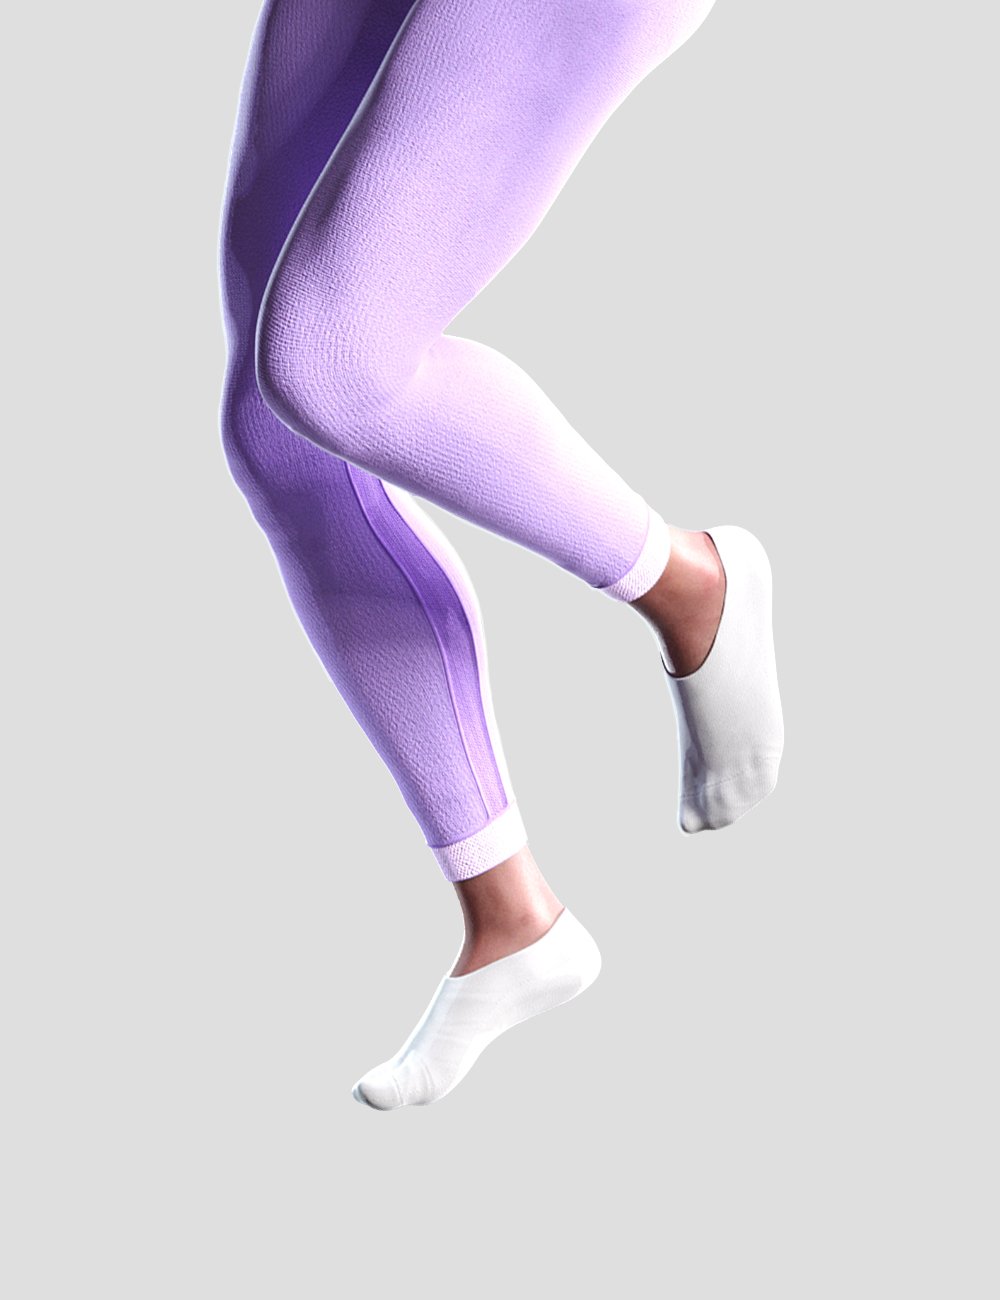 Knit Sports Outfit for Genesis 8 Females by: Romeo, 3D Models by Daz 3D